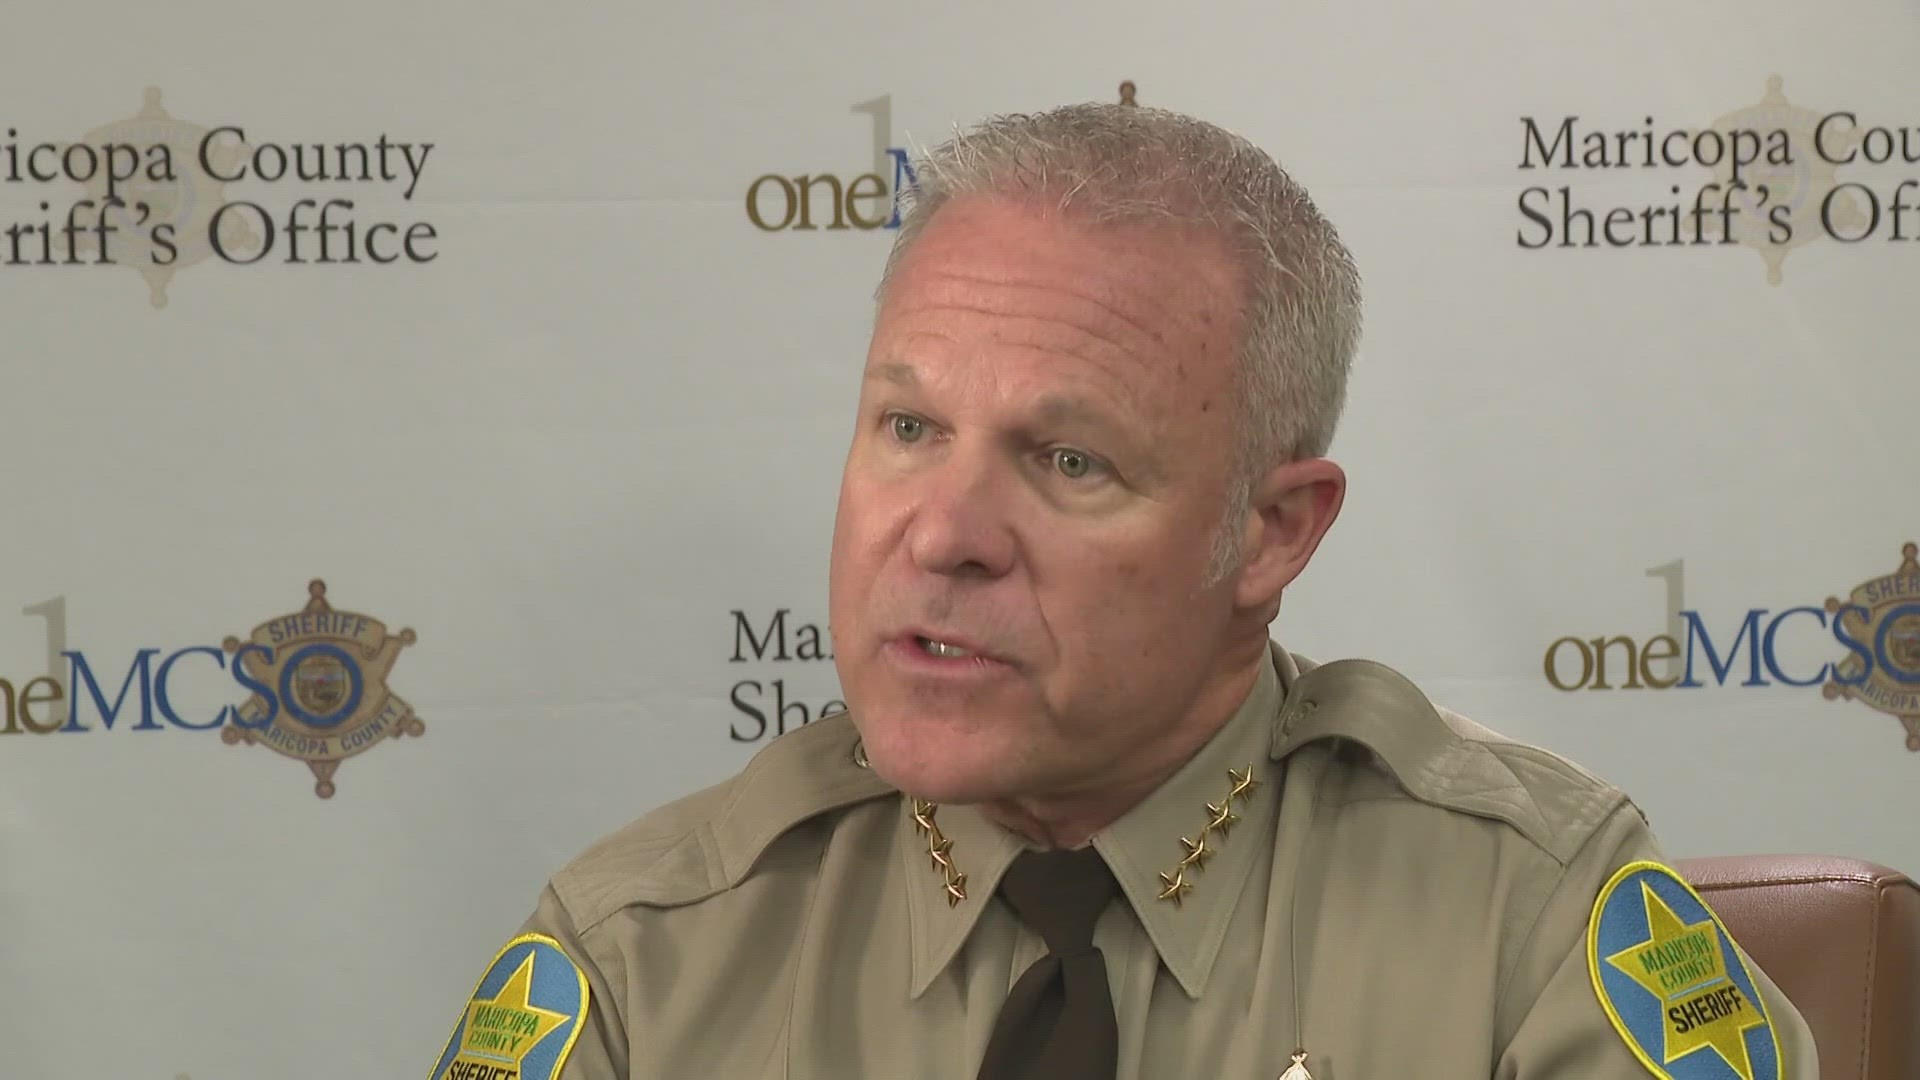 Maricopa County Sheriff Russ Skinner was recently selected to replace Paul Penzone after the former sheriff resigned.